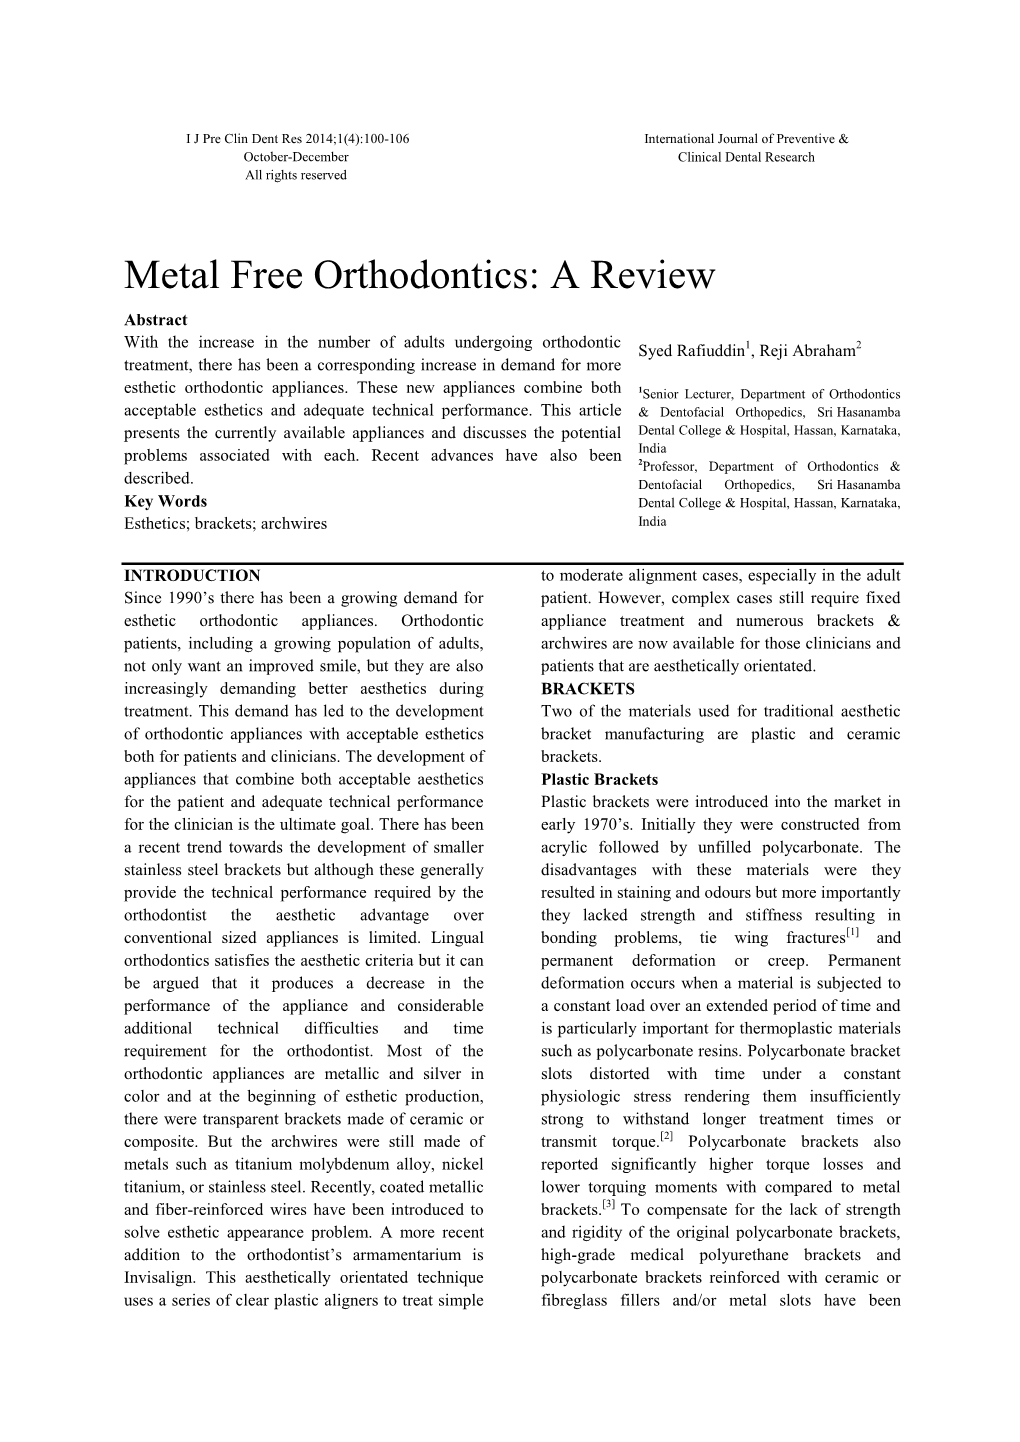 Metal Free Orthodontics: a Review